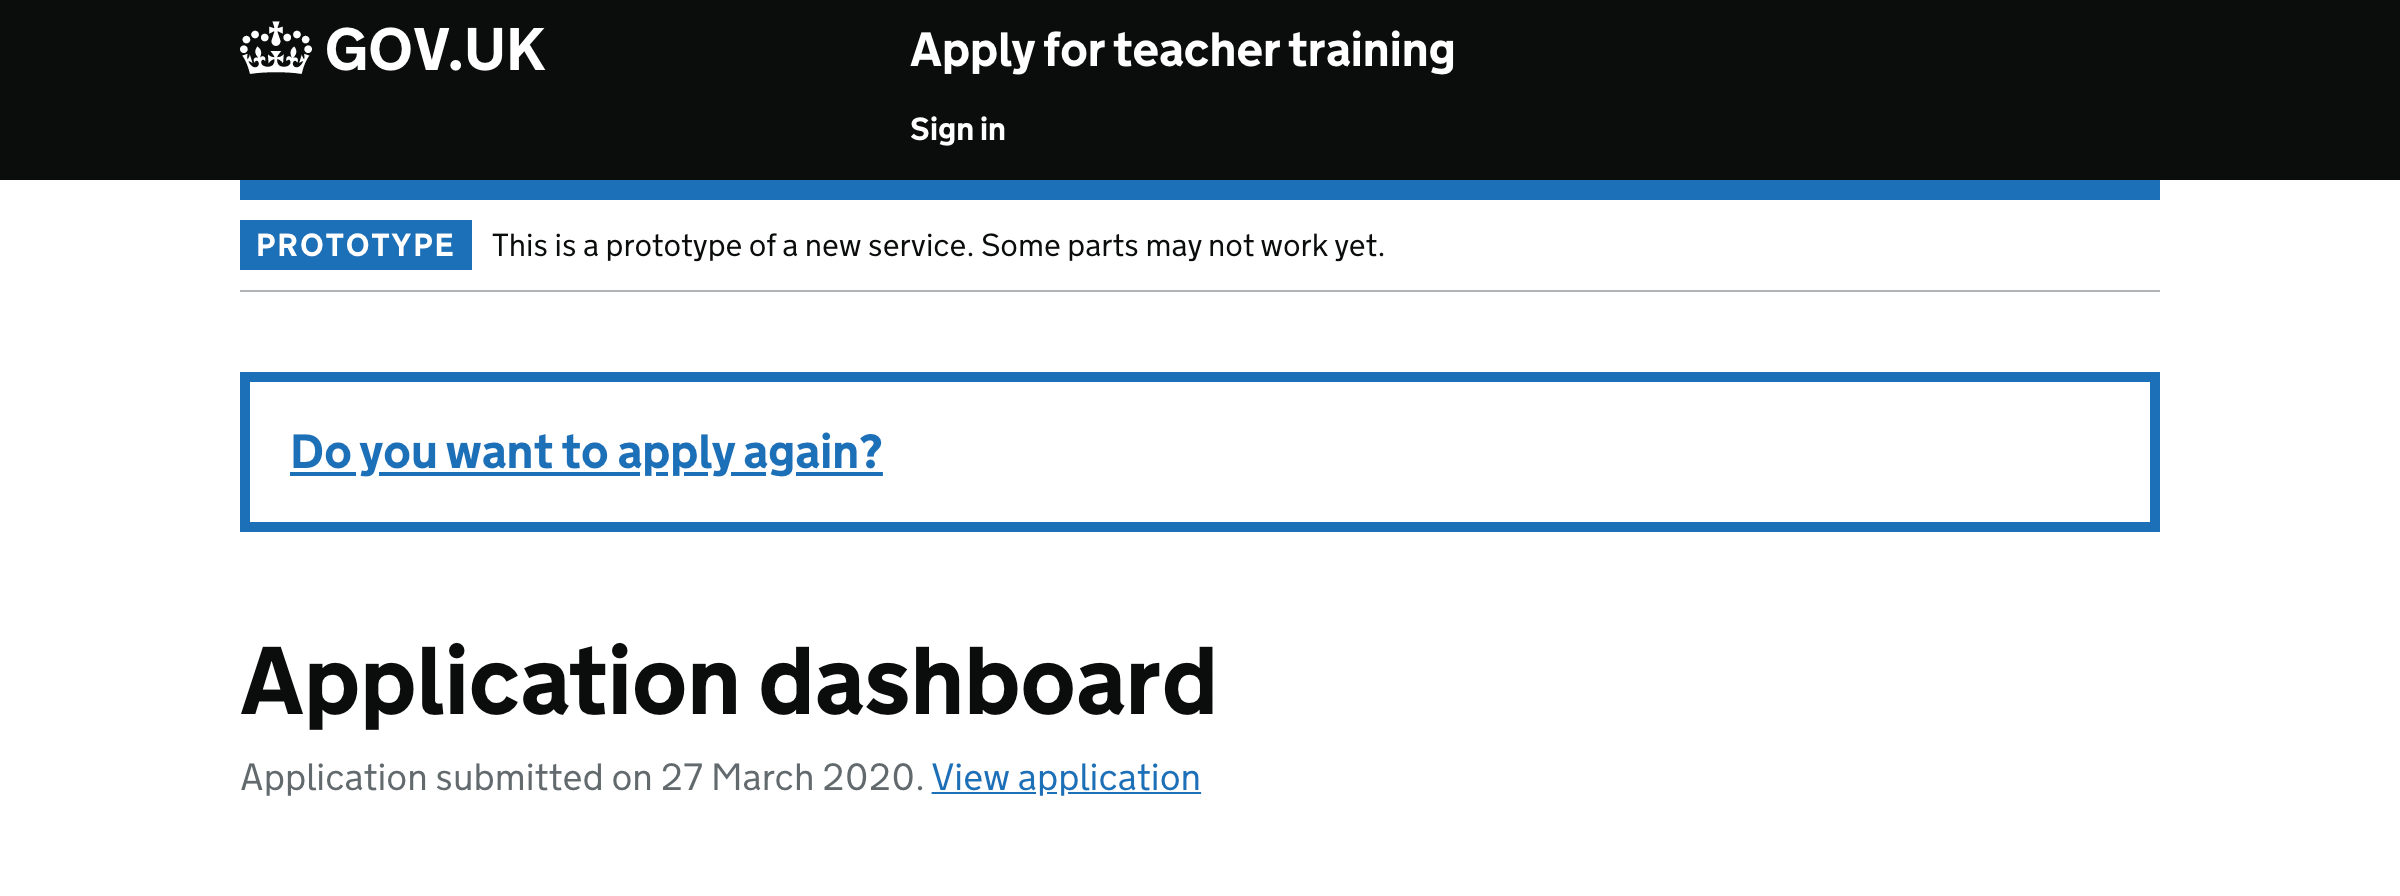 Screenshot of ‘Application dashboard’ with banner asking candidate if they want to apply again.